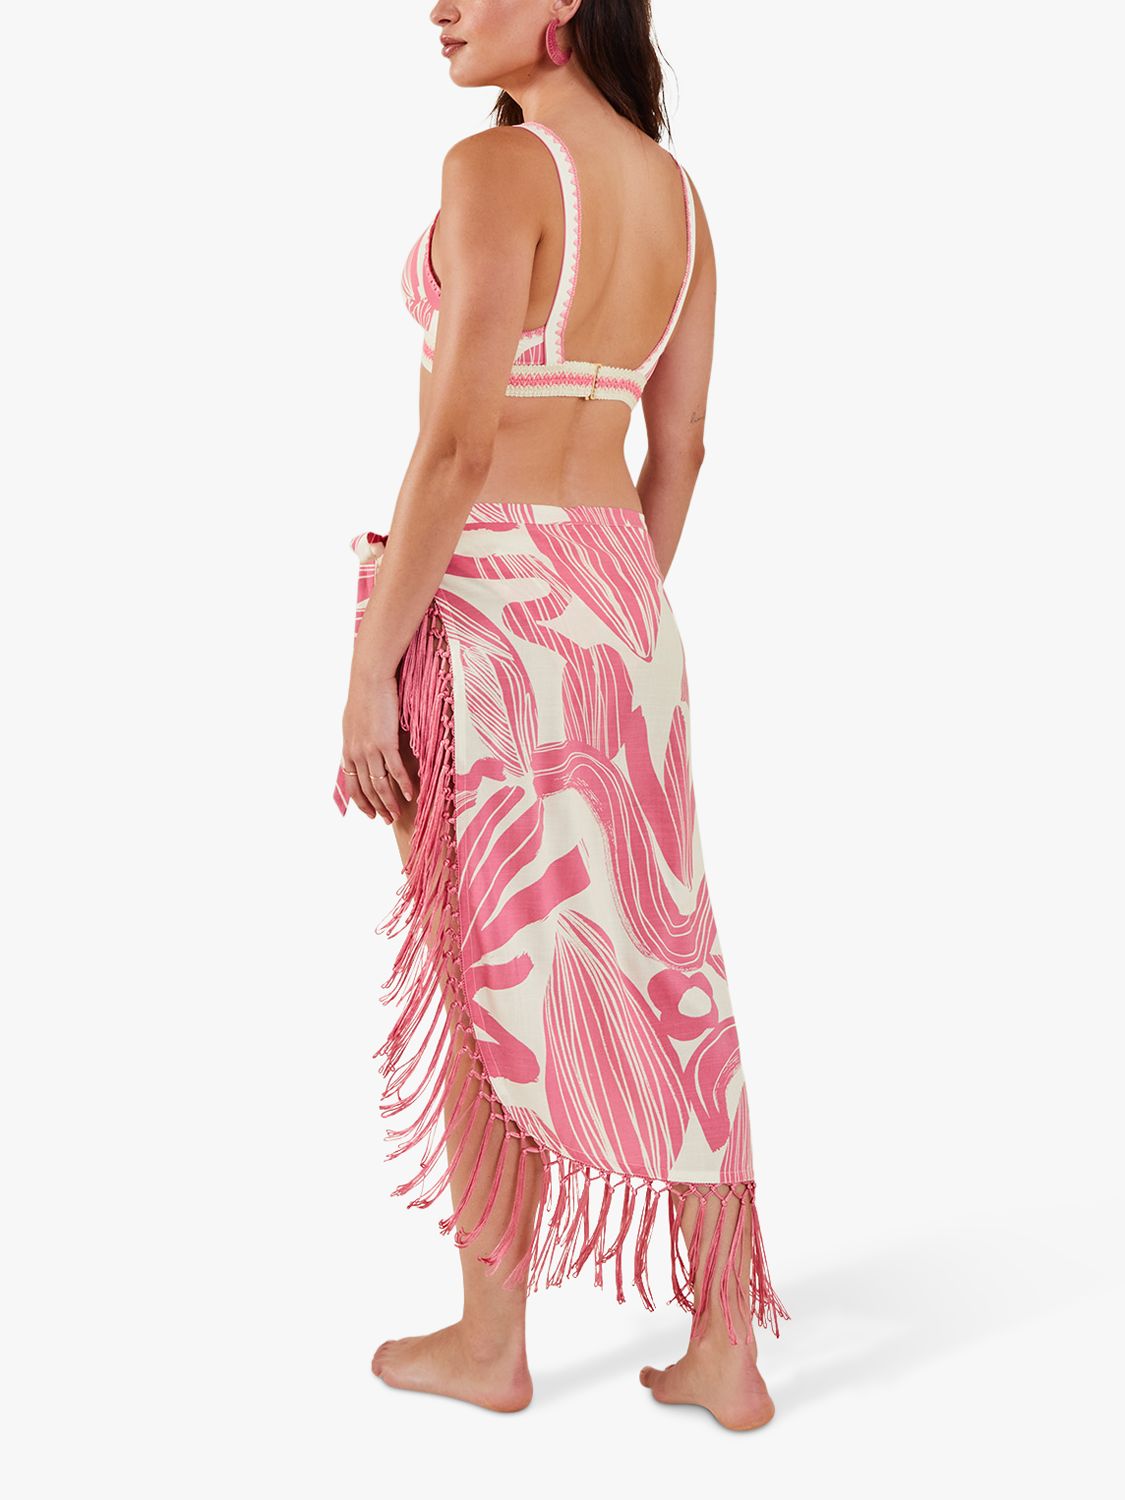 Accessorize Squiggle Sarong, Pink, XS